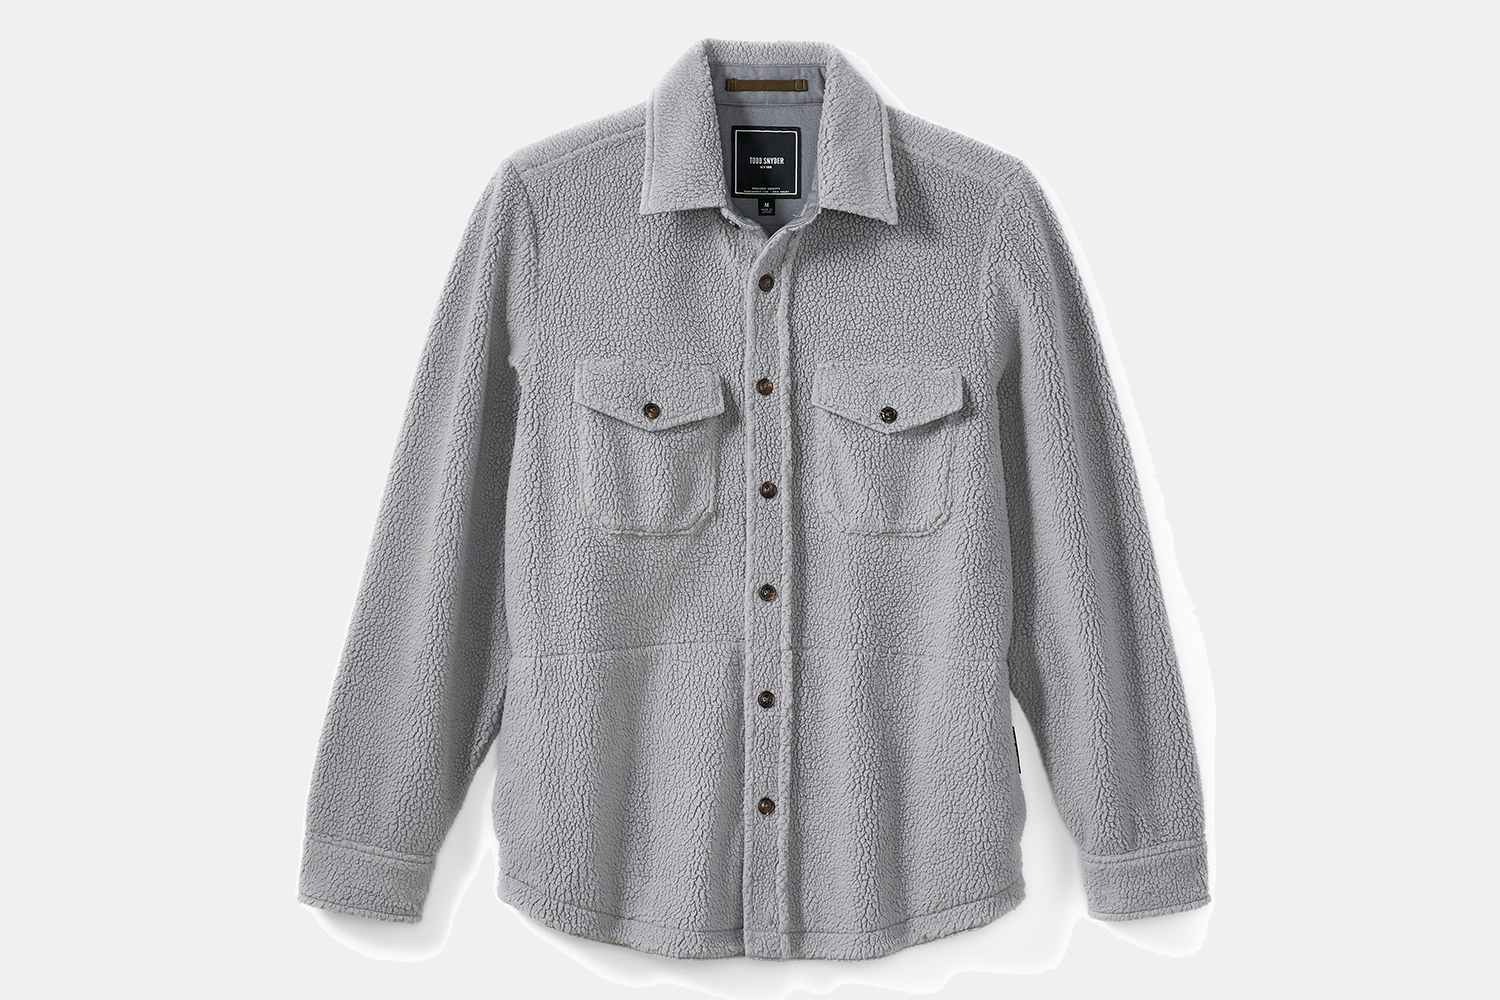 Grey overshirt from Todd Snyder